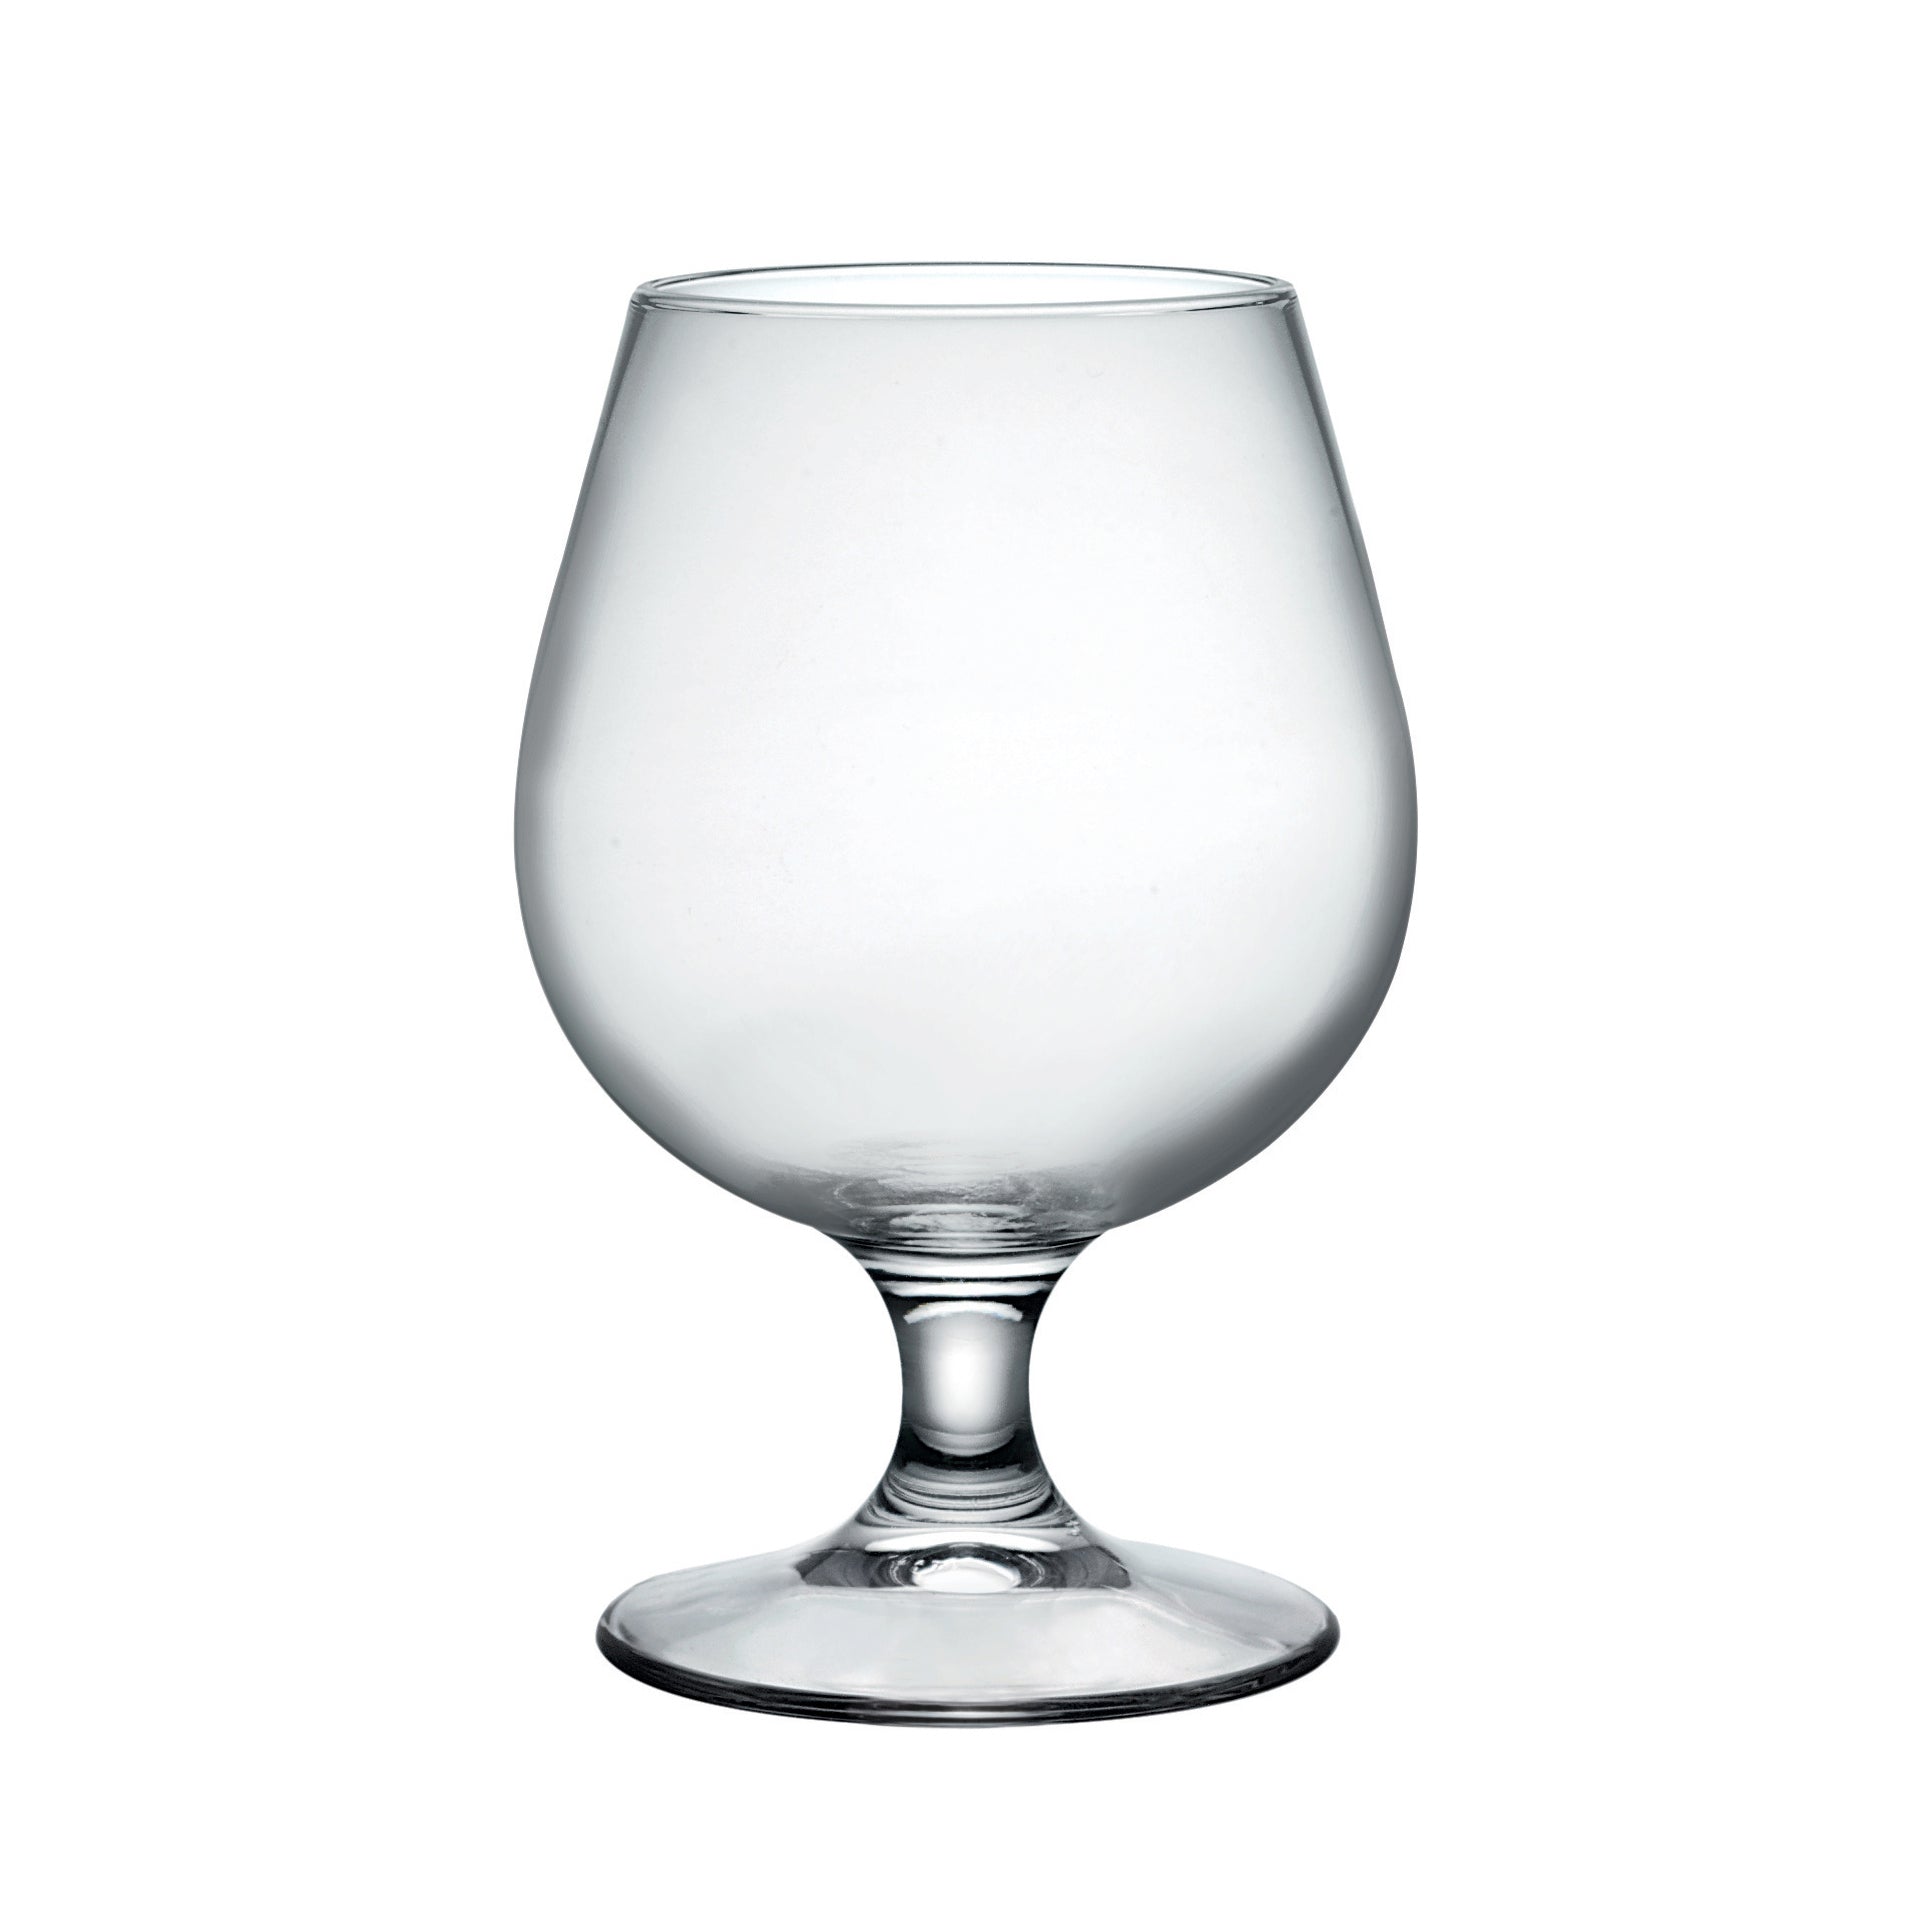 Crystal Cognac and Brandy Glasses, Set of 6 2915